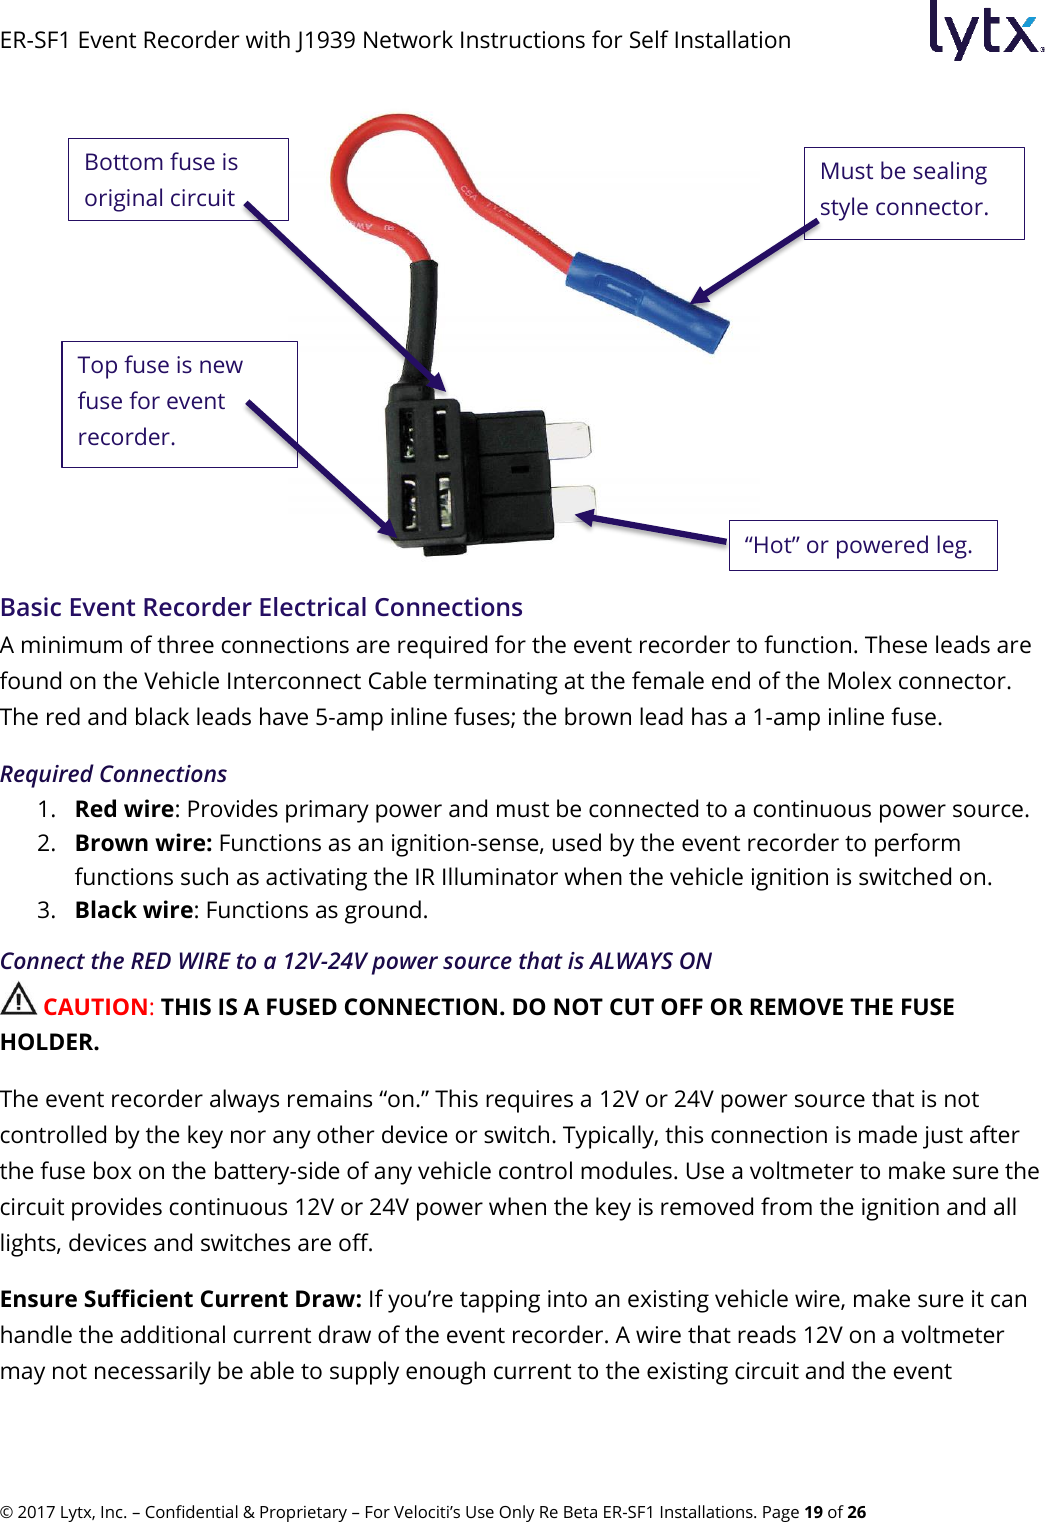 ER-SF1 Event Recorder with J1939 Network Instructions for Self Installation © 2017 Lytx, Inc. – Confidential &amp; Proprietary – For Velociti’s Use Only Re Beta ER-SF1 Installations. Page 19 of 26  Basic Event Recorder Electrical Connections A minimum of three connections are required for the event recorder to function. These leads are found on the Vehicle Interconnect Cable terminating at the female end of the Molex connector. The red and black leads have 5-amp inline fuses; the brown lead has a 1-amp inline fuse. Required Connections 1. Red wire: Provides primary power and must be connected to a continuous power source. 2. Brown wire: Functions as an ignition-sense, used by the event recorder to perform functions such as activating the IR Illuminator when the vehicle ignition is switched on. 3. Black wire: Functions as ground. Connect the RED WIRE to a 12V-24V power source that is ALWAYS ON  CAUTION: THIS IS A FUSED CONNECTION. DO NOT CUT OFF OR REMOVE THE FUSE HOLDER. The event recorder always remains “on.” This requires a 12V or 24V power source that is not controlled by the key nor any other device or switch. Typically, this connection is made just after the fuse box on the battery-side of any vehicle control modules. Use a voltmeter to make sure the circuit provides continuous 12V or 24V power when the key is removed from the ignition and all lights, devices and switches are off. Ensure Sufficient Current Draw: If you’re tapping into an existing vehicle wire, make sure it can handle the additional current draw of the event recorder. A wire that reads 12V on a voltmeter may not necessarily be able to supply enough current to the existing circuit and the event Bottom fuse is original circuit fuse. Top fuse is new fuse for event recorder. Must be sealing style connector. “Hot” or powered leg. 